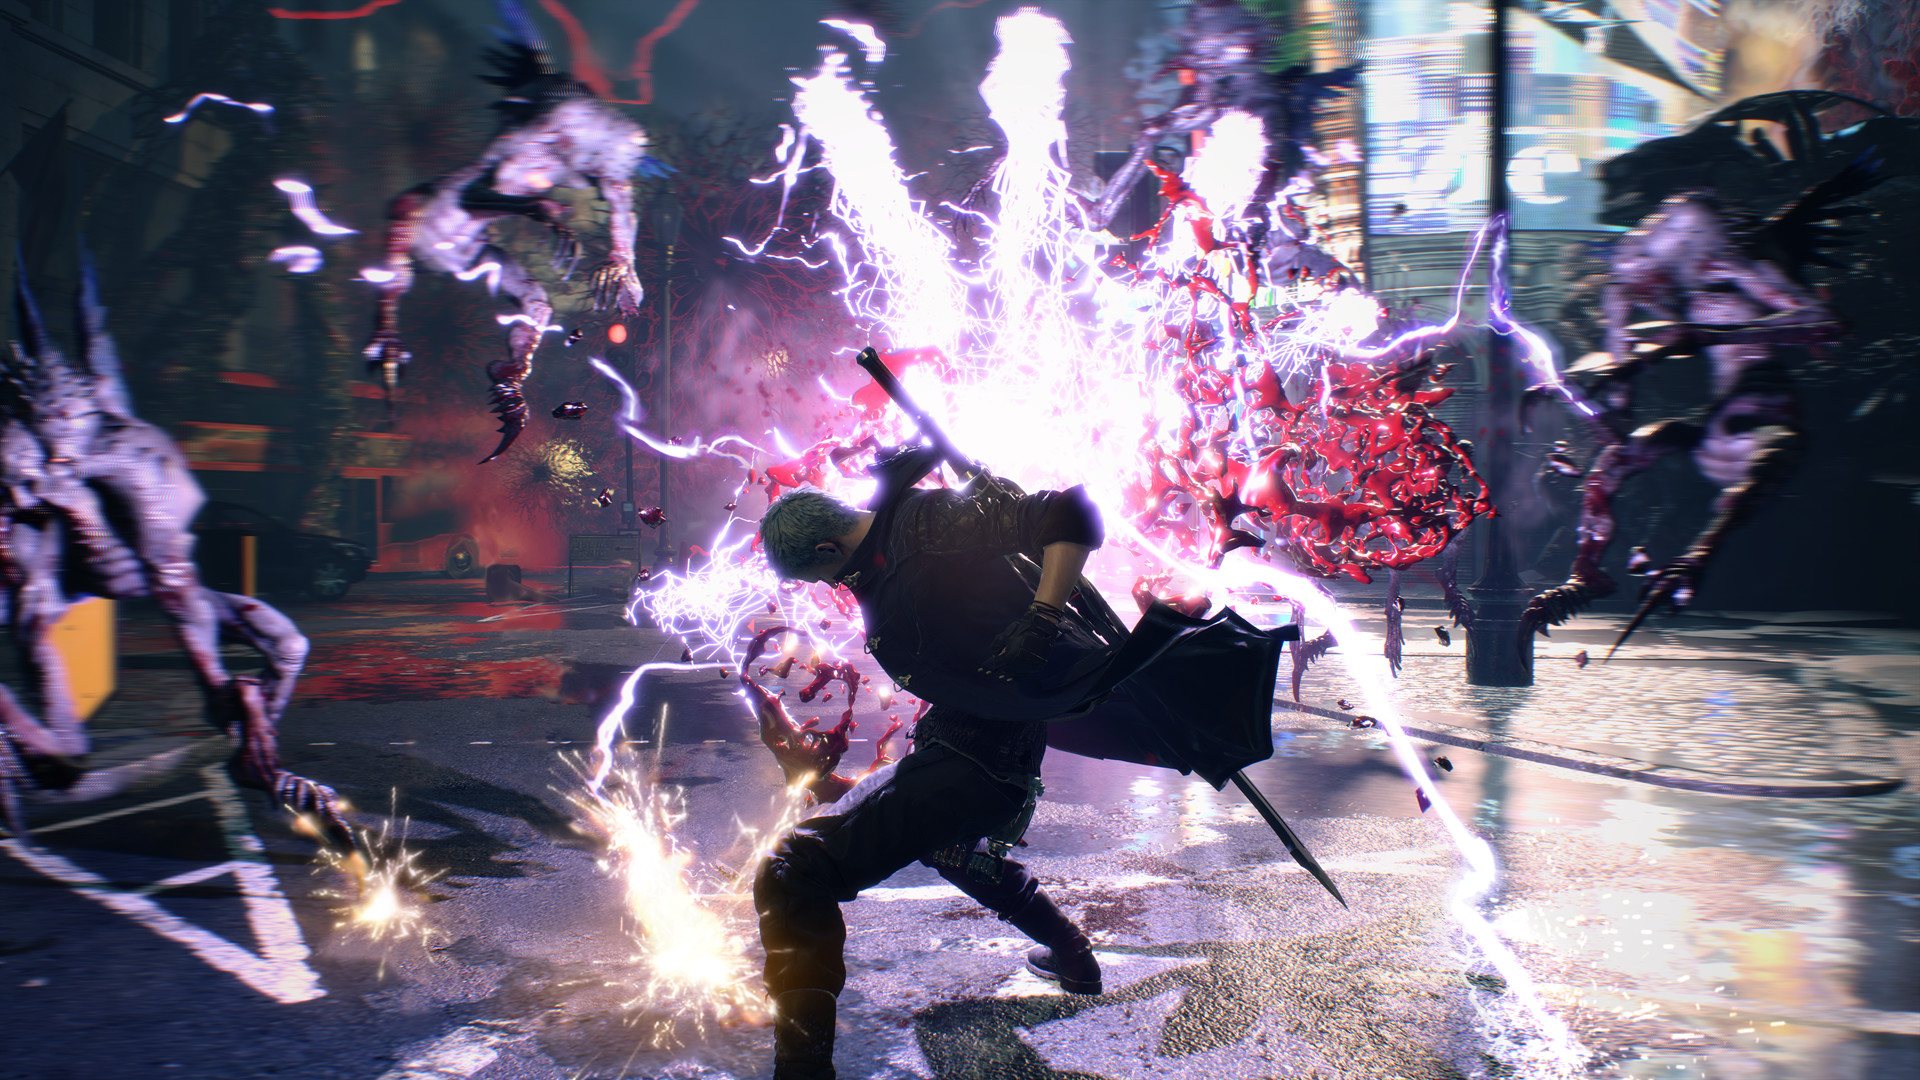 [$ 13.56] Devil May Cry 5 Deluxe Edition EU Steam CD Key